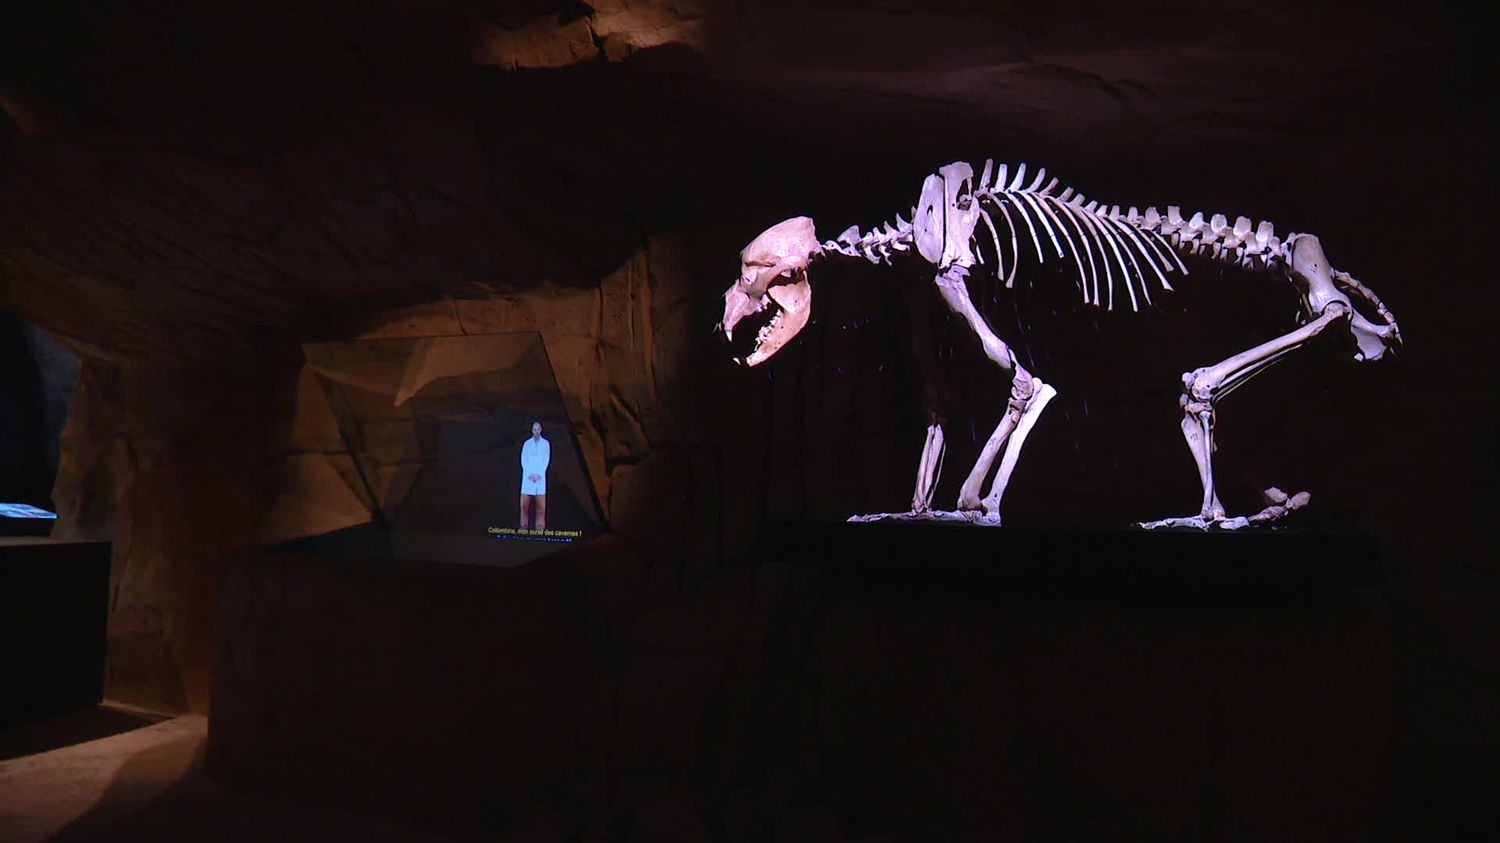 In Savoy, the Museum of Cave Bears reopens its doors with an impressive new room